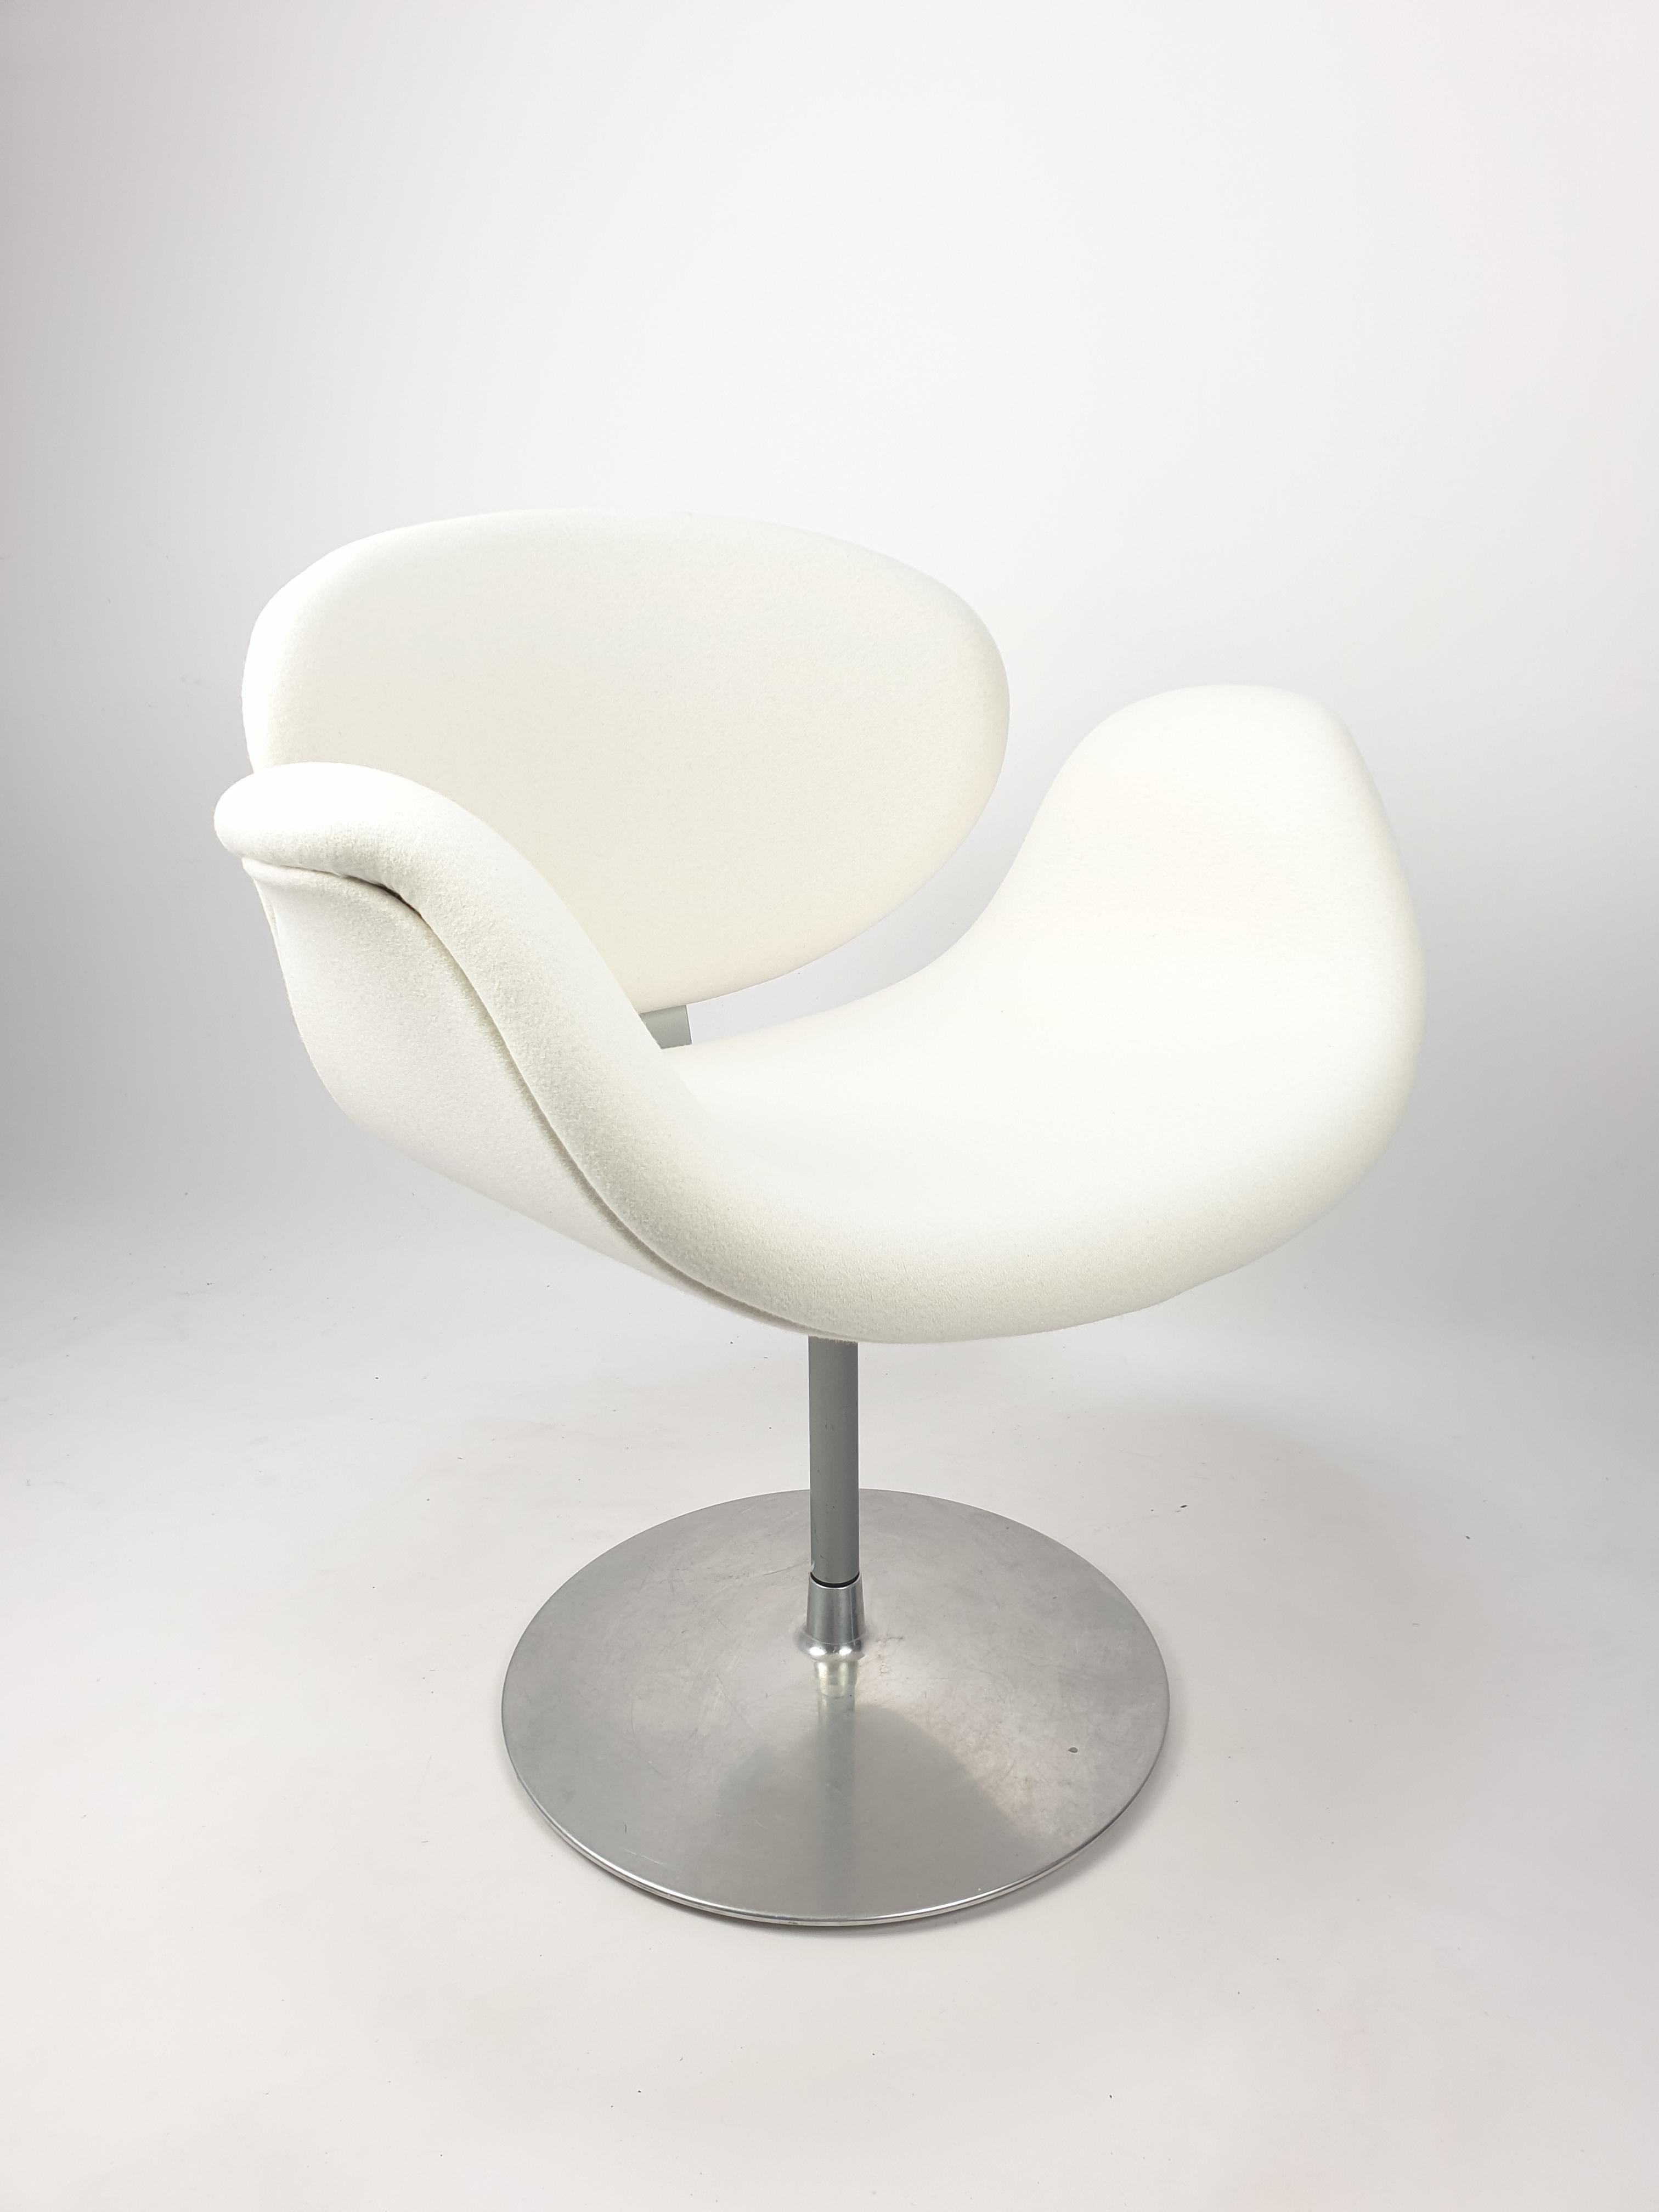 Cute and very comfortable pivoting Armchair, designed by the famous Pierre Paulin in te 60's. Fabricated by Artifort in the 80's. Round metal base with a wooden frame, just upholstered with lovely and very soft Pierre Frey wool fabric. The chair is